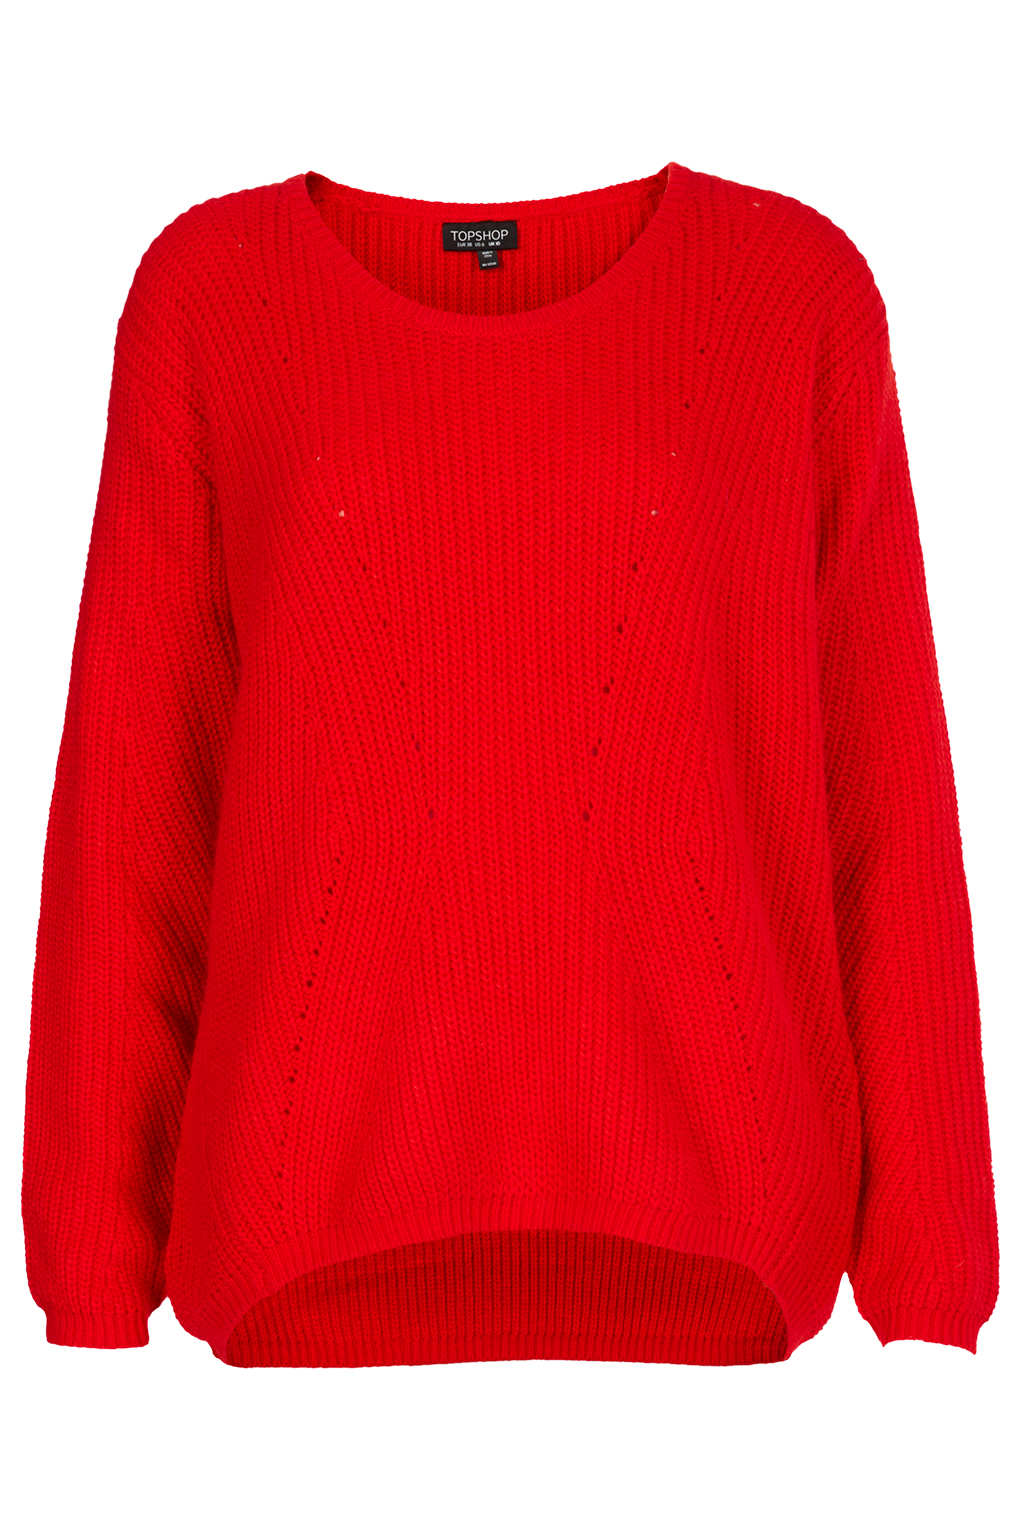 Lyst - Topshop Knitted Clean Rib Jumper in Red